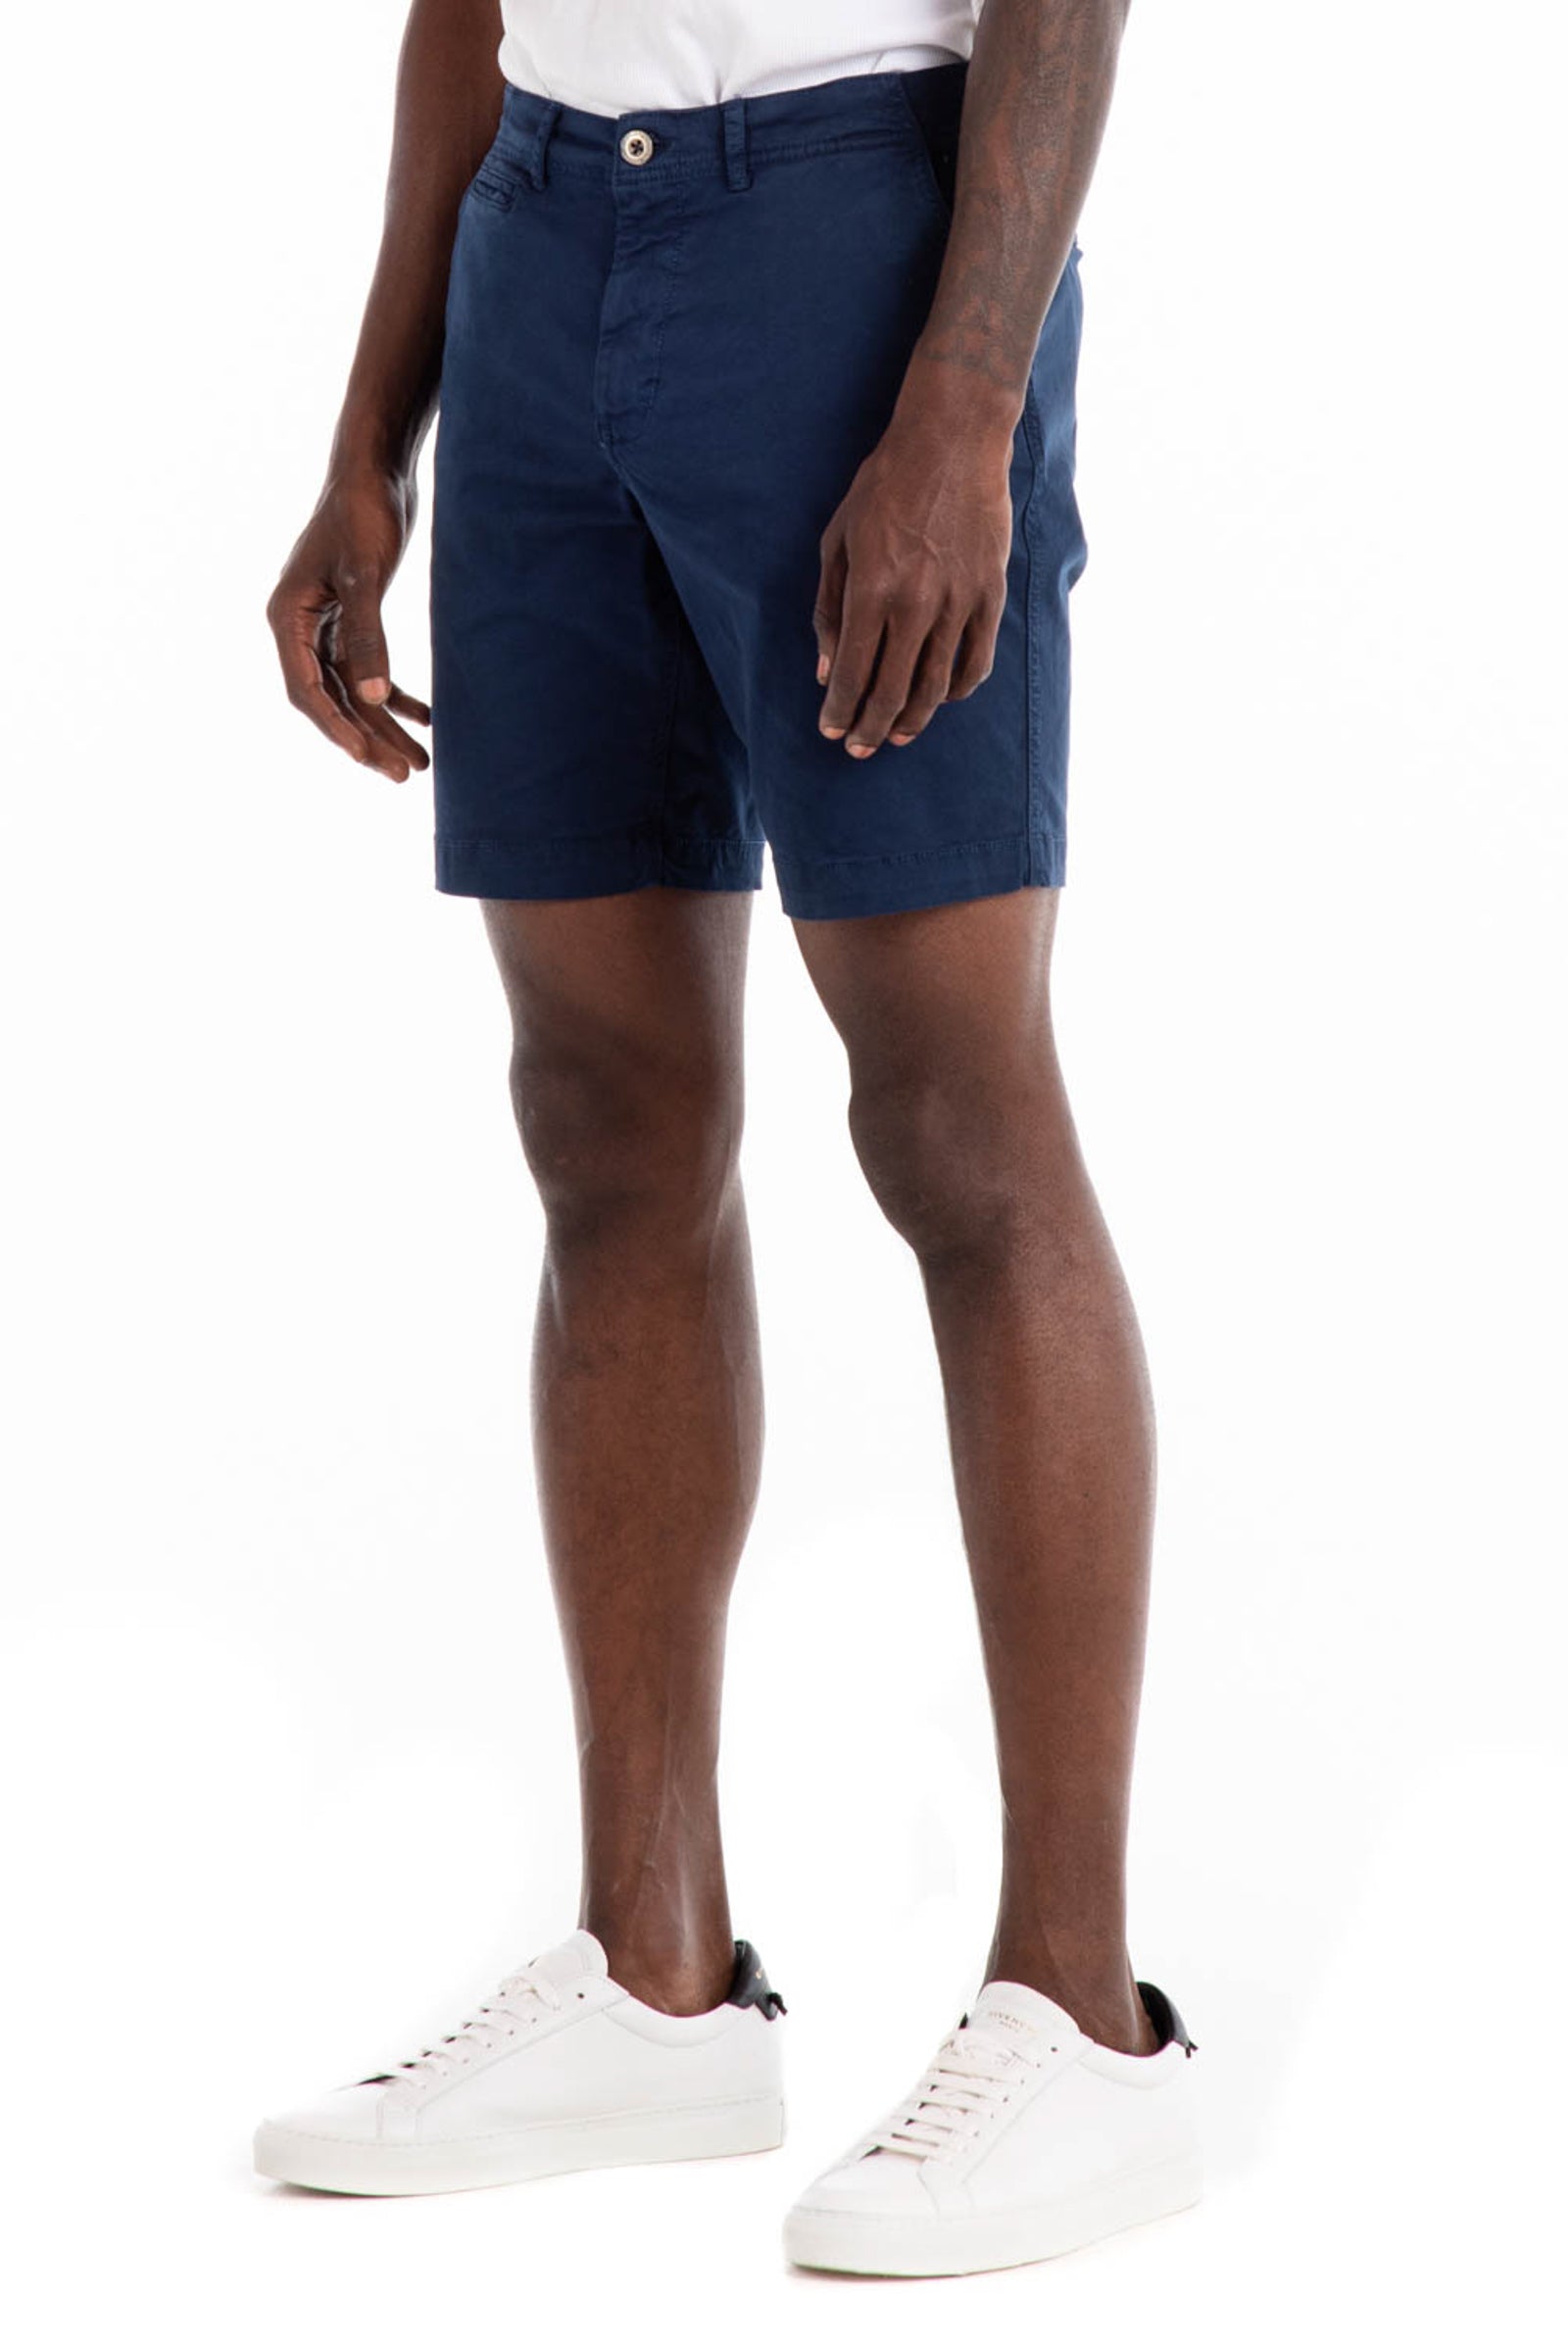 Original Paperbacks Walden Chino Short in Navy on Model Cropped Side View